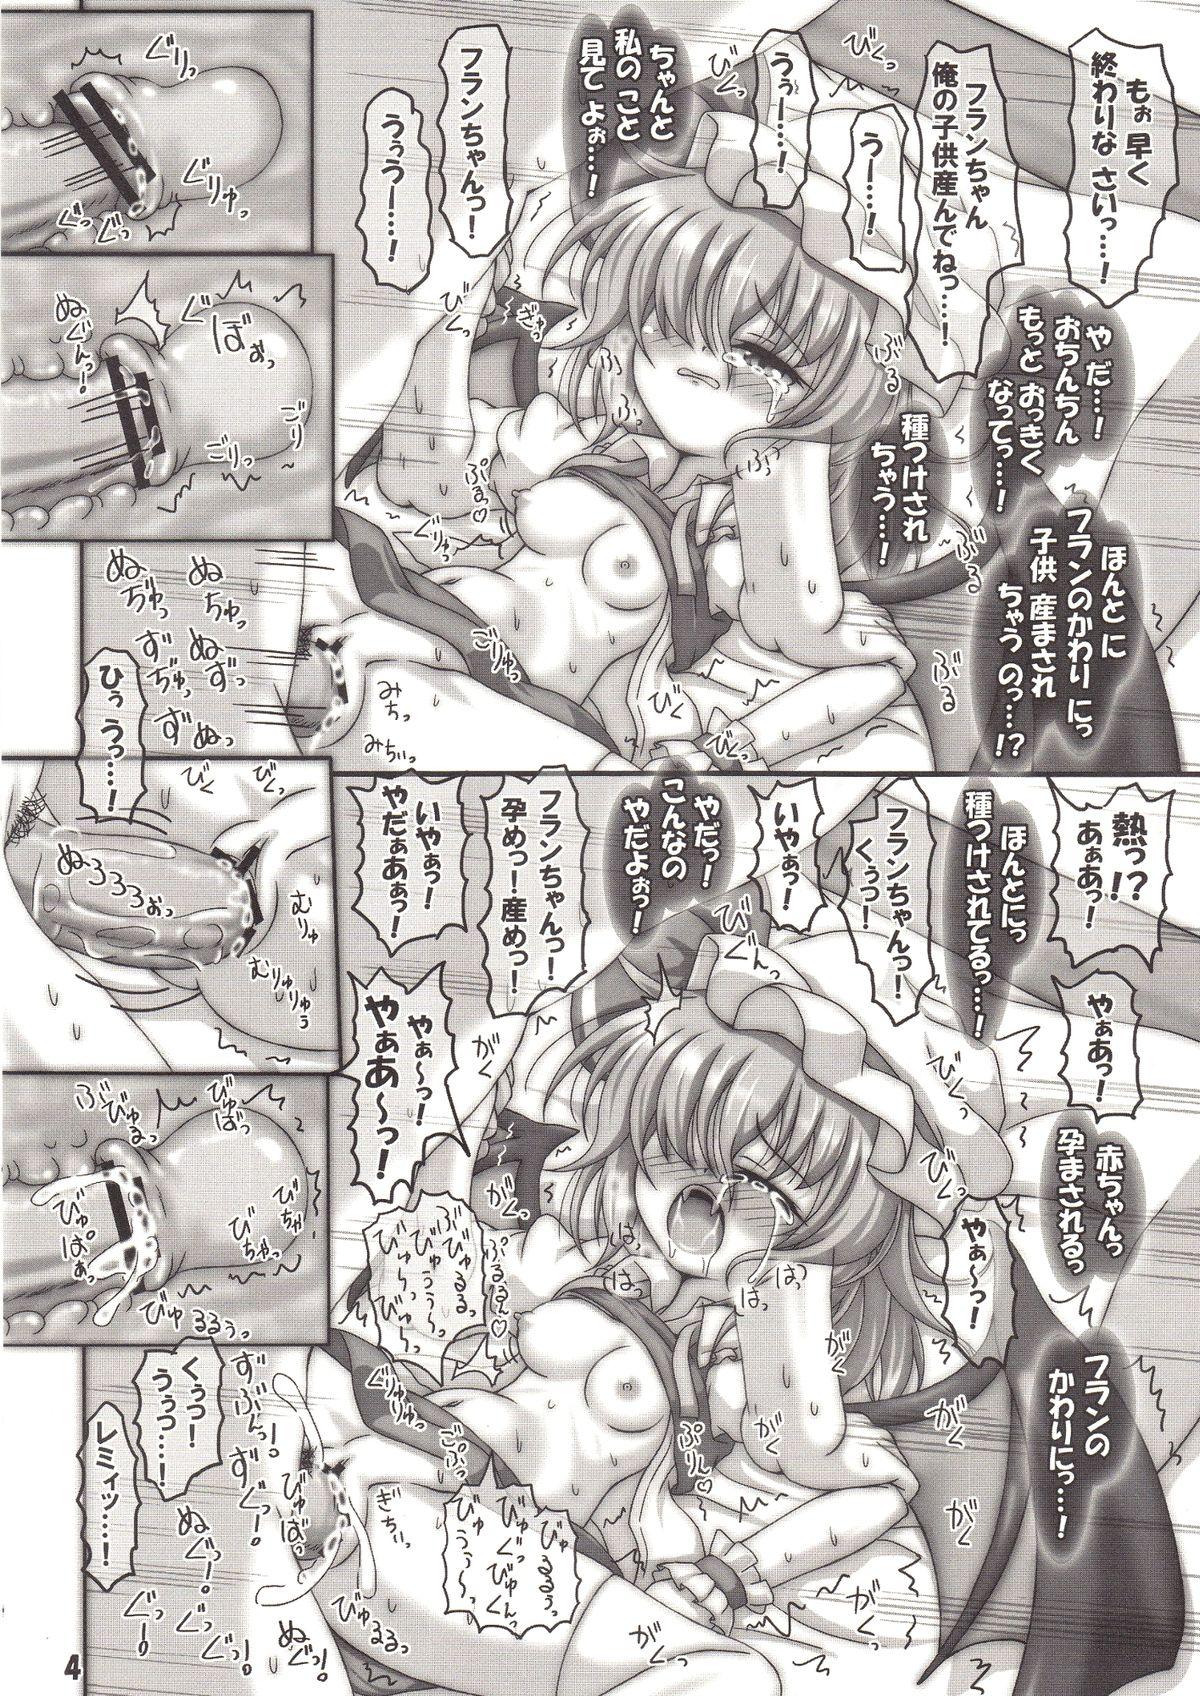 Tites CospRemilia! - Touhou project Petite Teen - Page 4